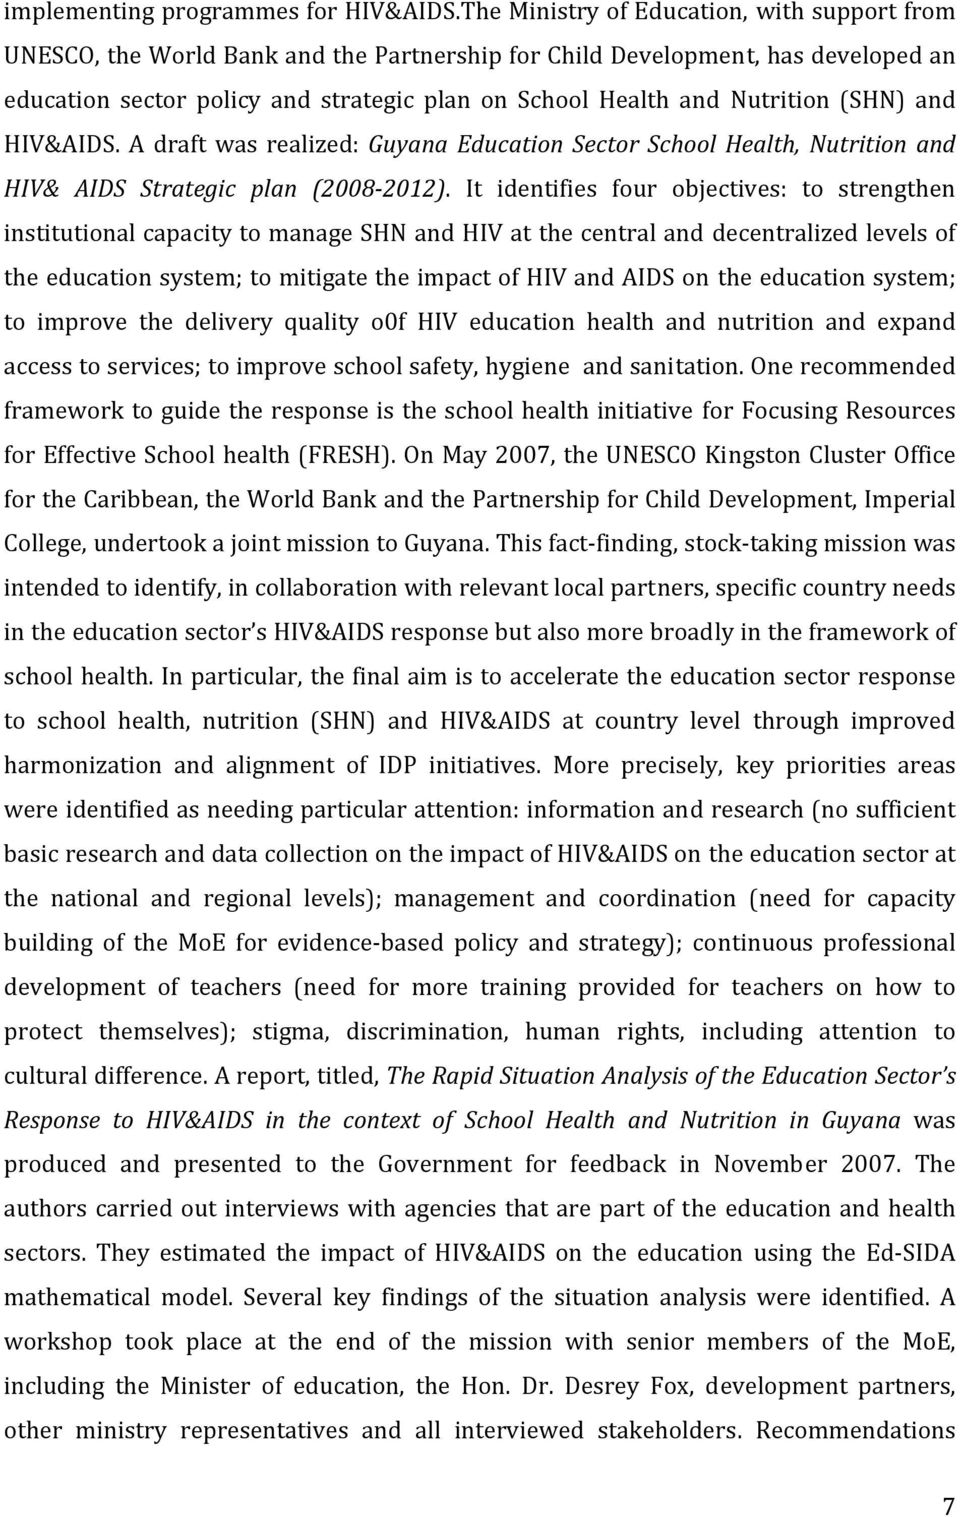 Nutrition (SHN) and HIV&AIDS. A draft was realized: Guyana Education Sector School Health, Nutrition and HIV& AIDS Strategic plan (2008 2012).